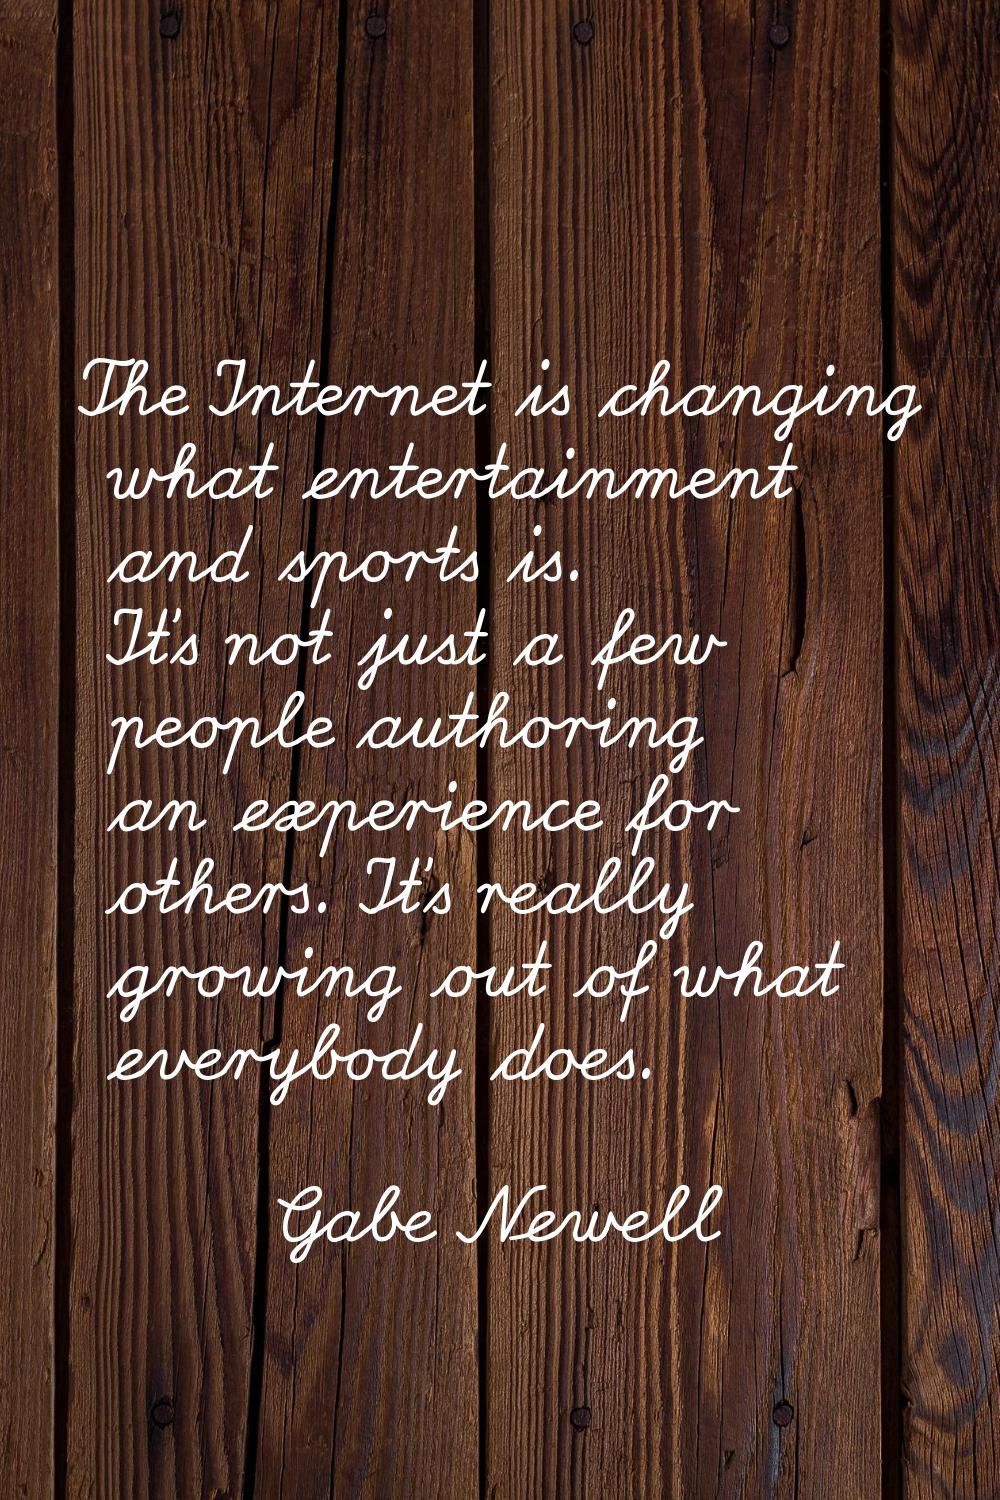 The Internet is changing what entertainment and sports is. It's not just a few people authoring an 